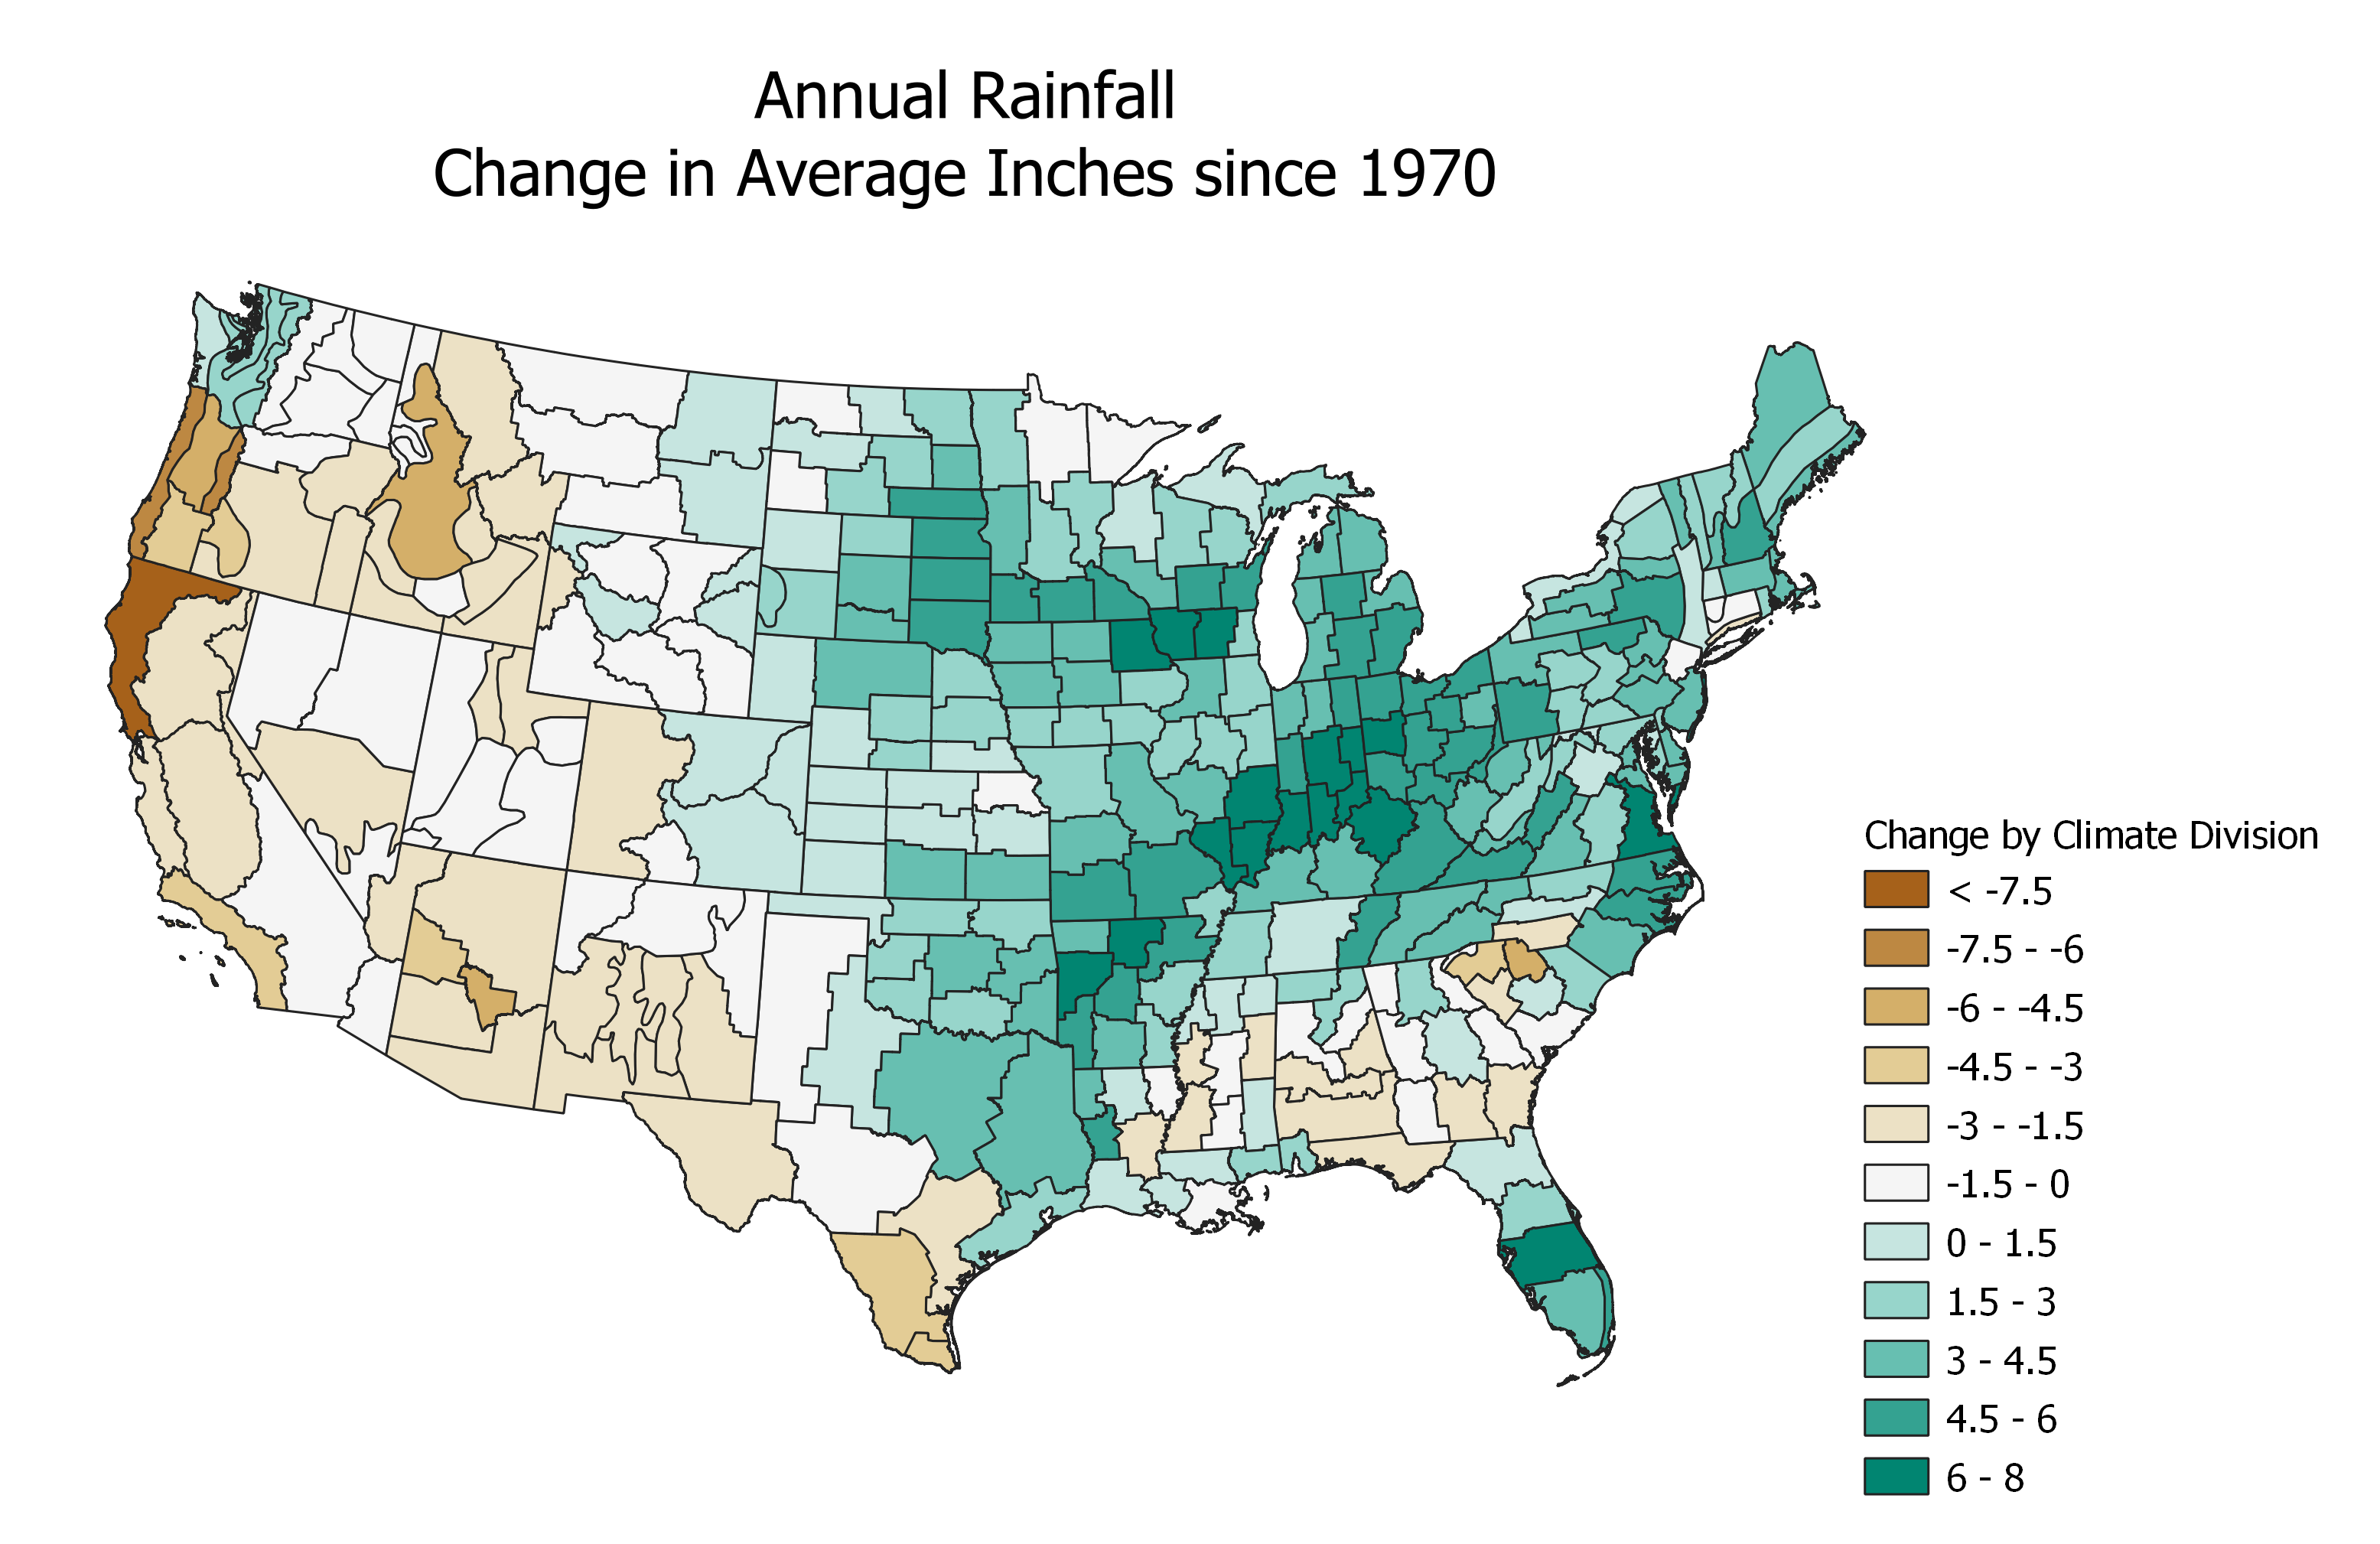 A new analysis of federal data shows that average annual rainfall has increased as much as 8 inches throughout much of the Mississippi River basin since 1970. Meanwhile, parts of the west have lost 6 to 7 inches of rain a year.